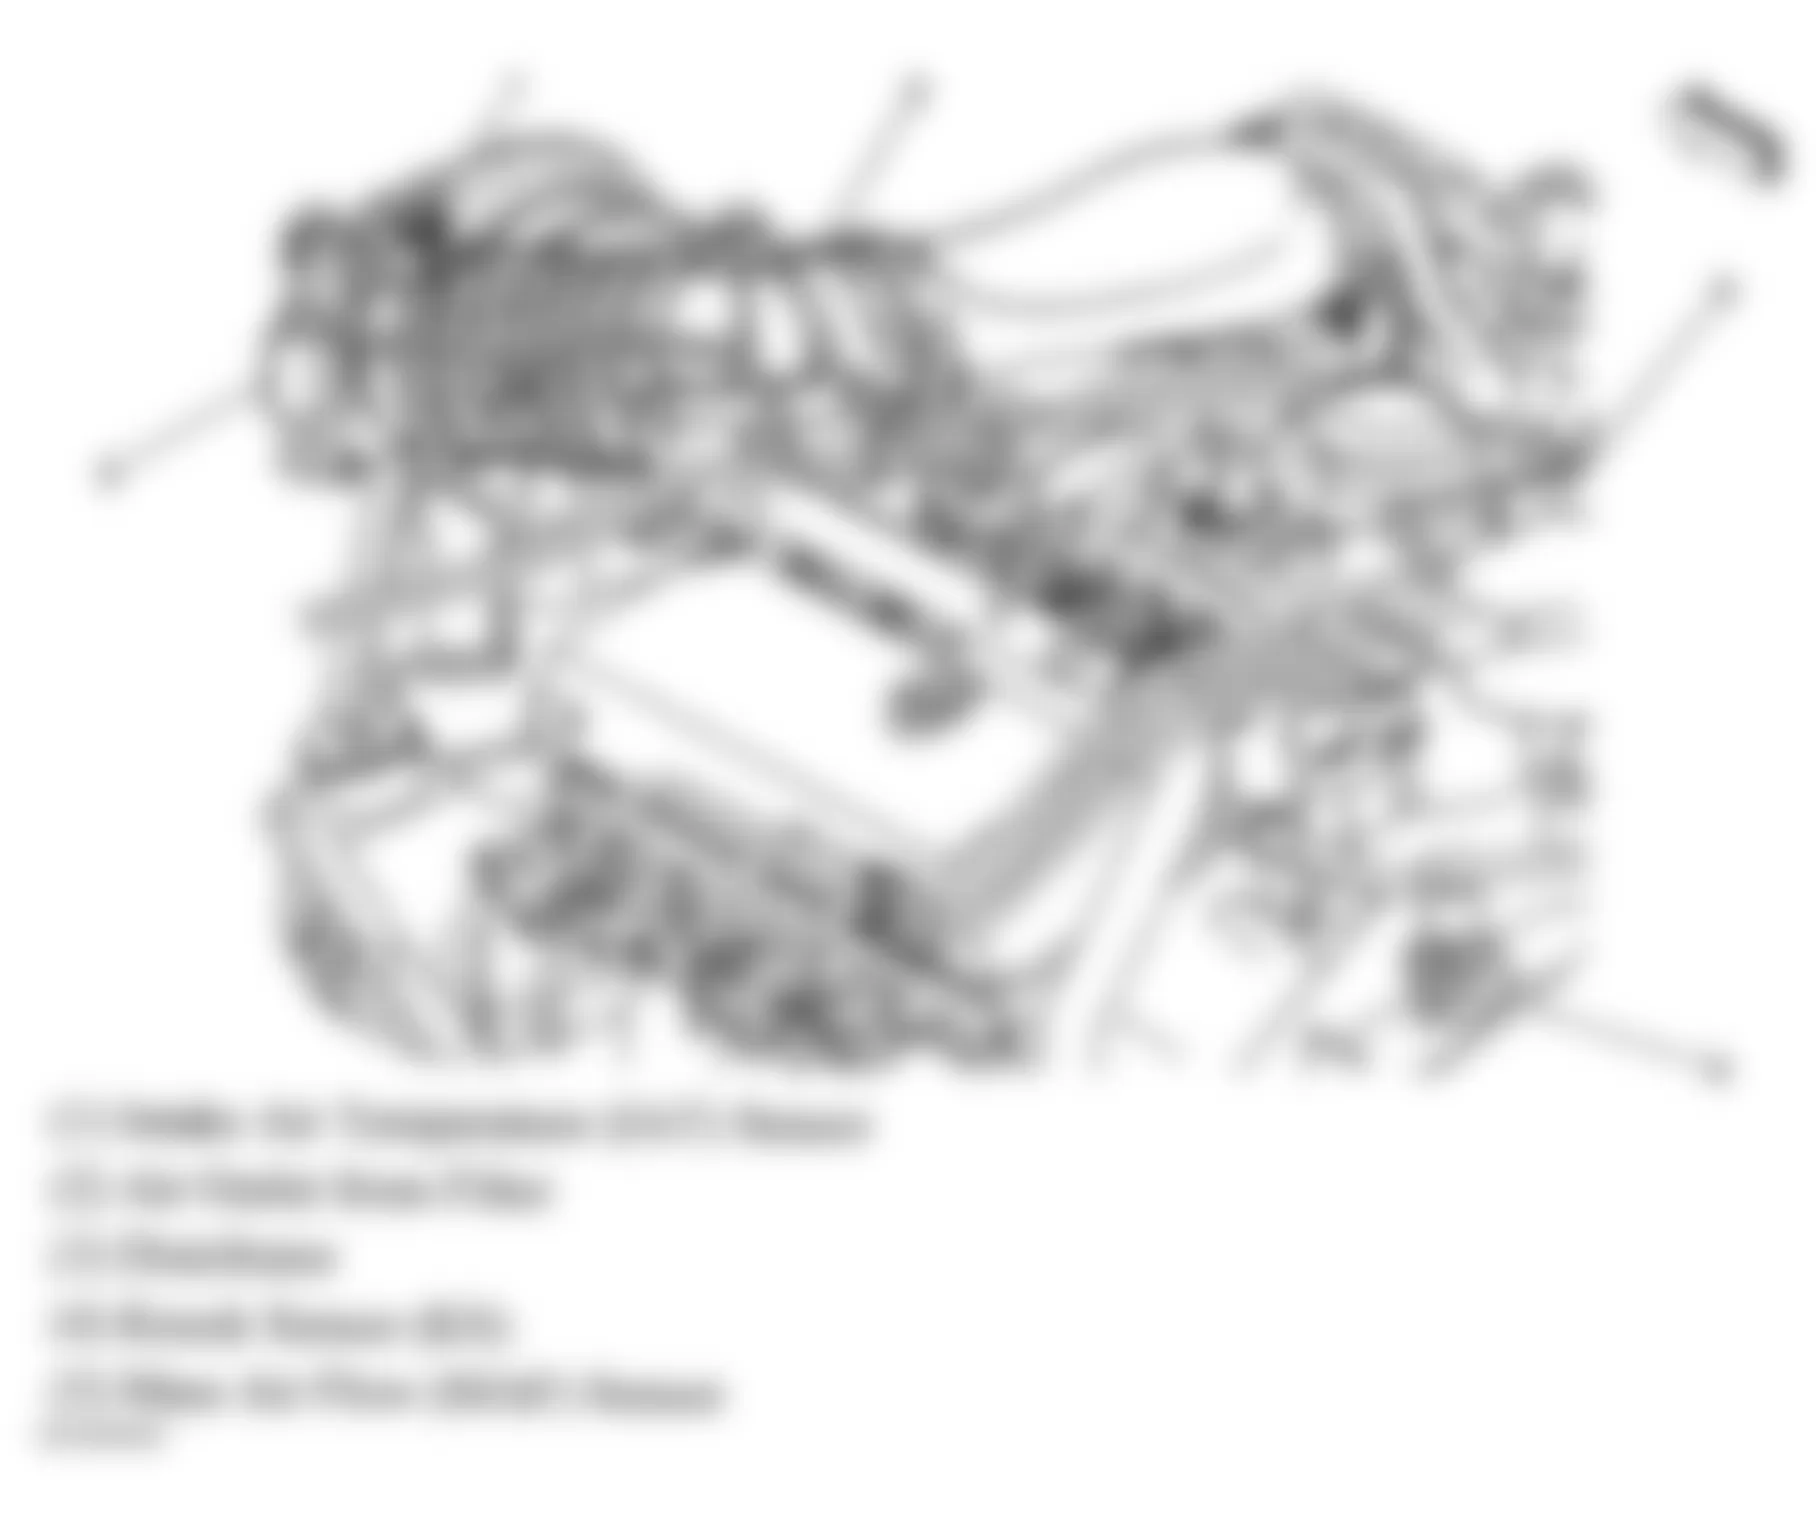 GMC Sonoma 2004 - Component Locations -  Top Left Of Engine (4.3L)